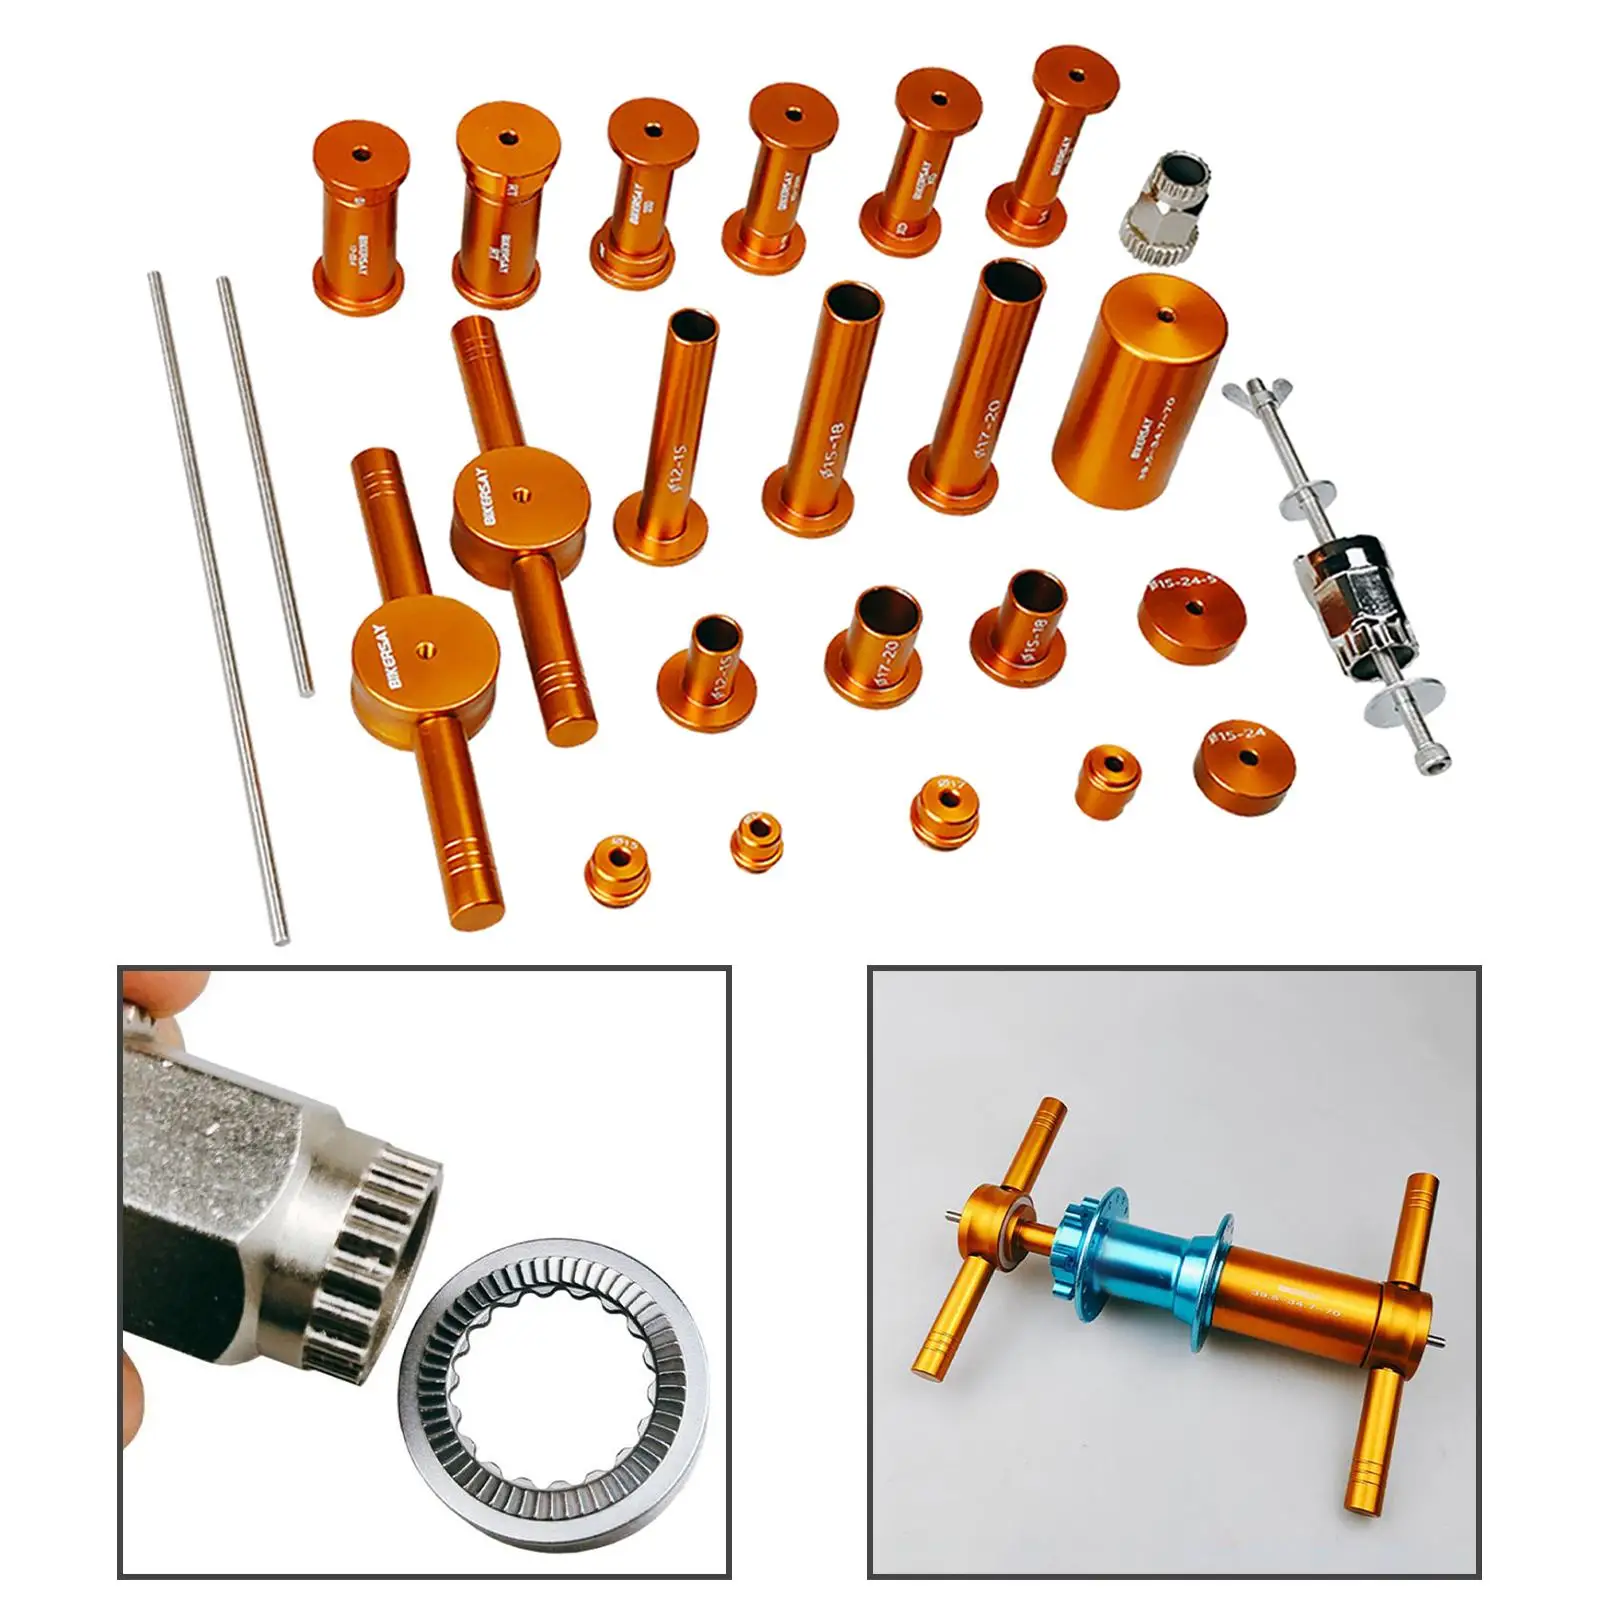 Bearing Loading and Unloading Set Durable Metal Freehub Remover Professional